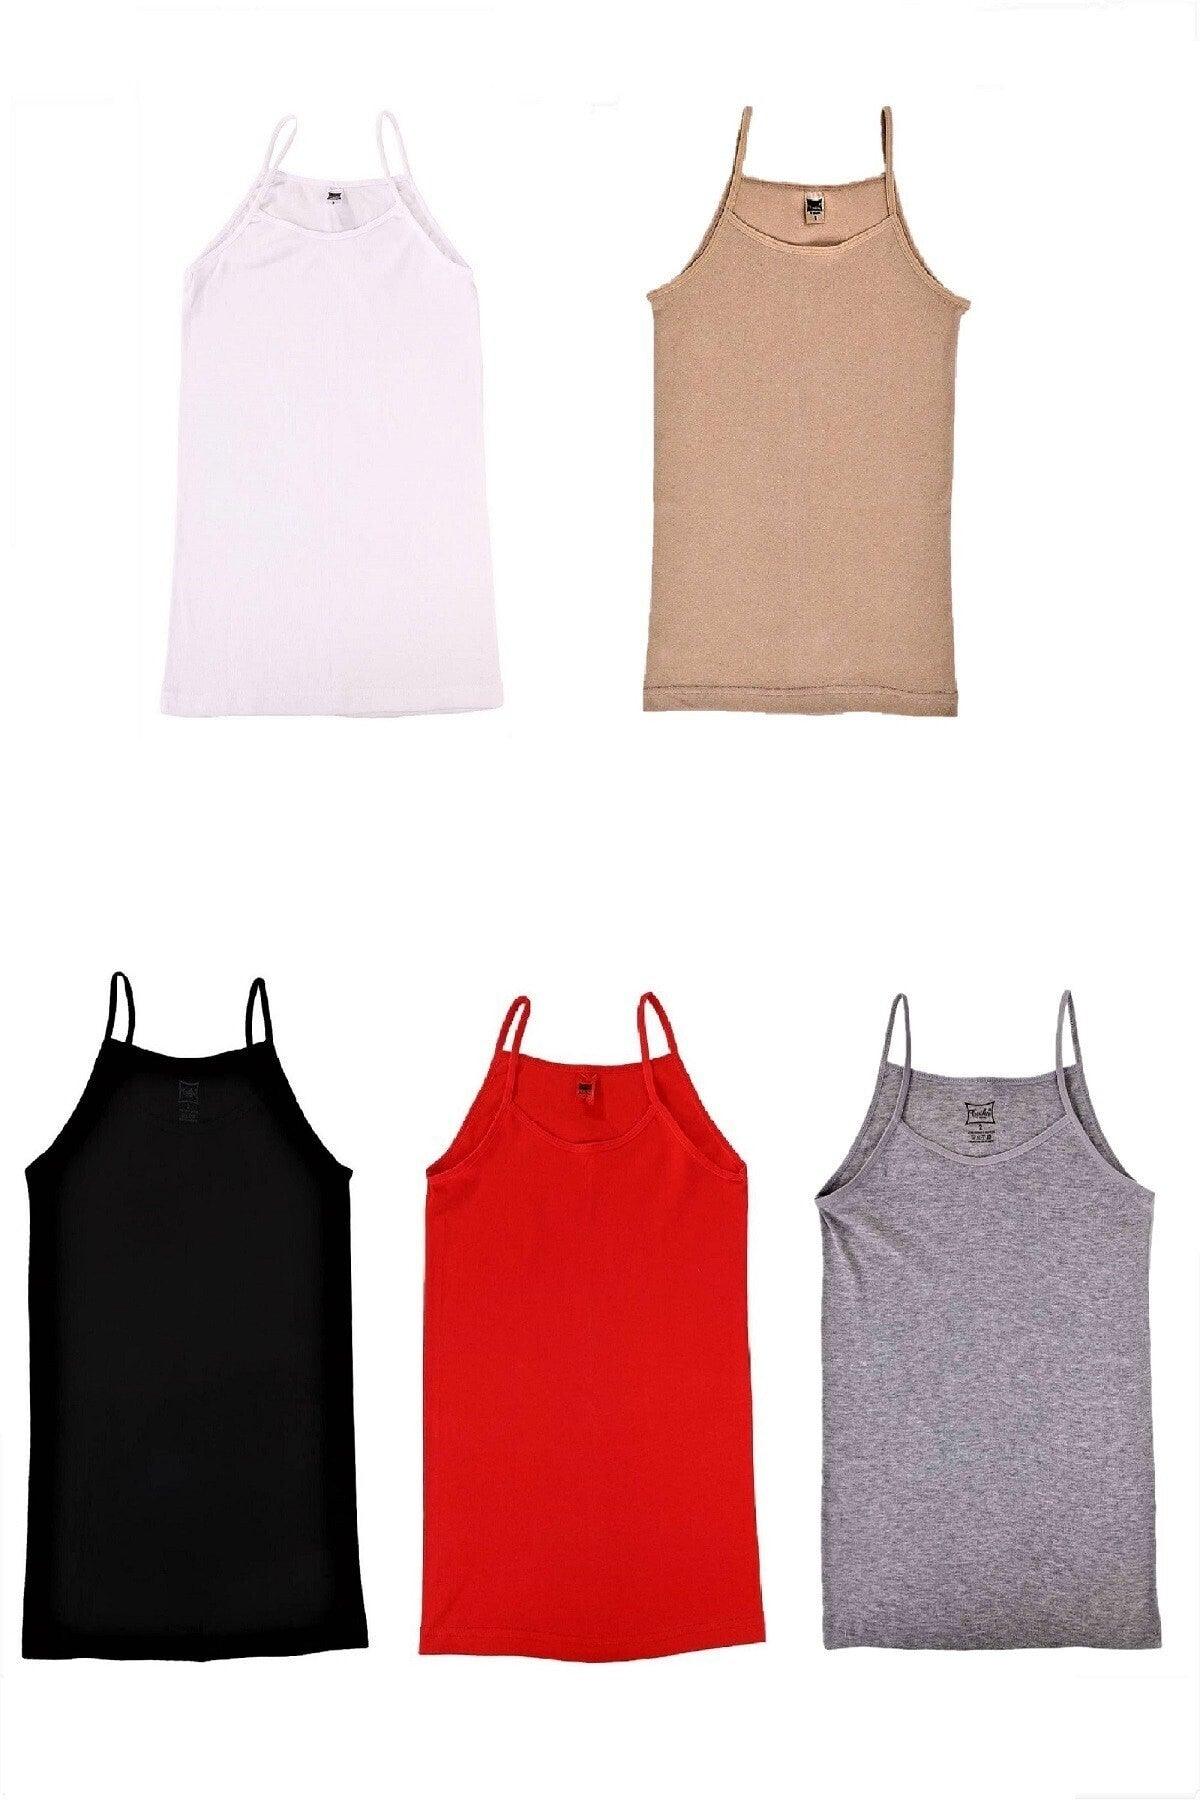 Women's Mixed Color Rope Suspended Cotton Singlet 5 Pieces - Swordslife